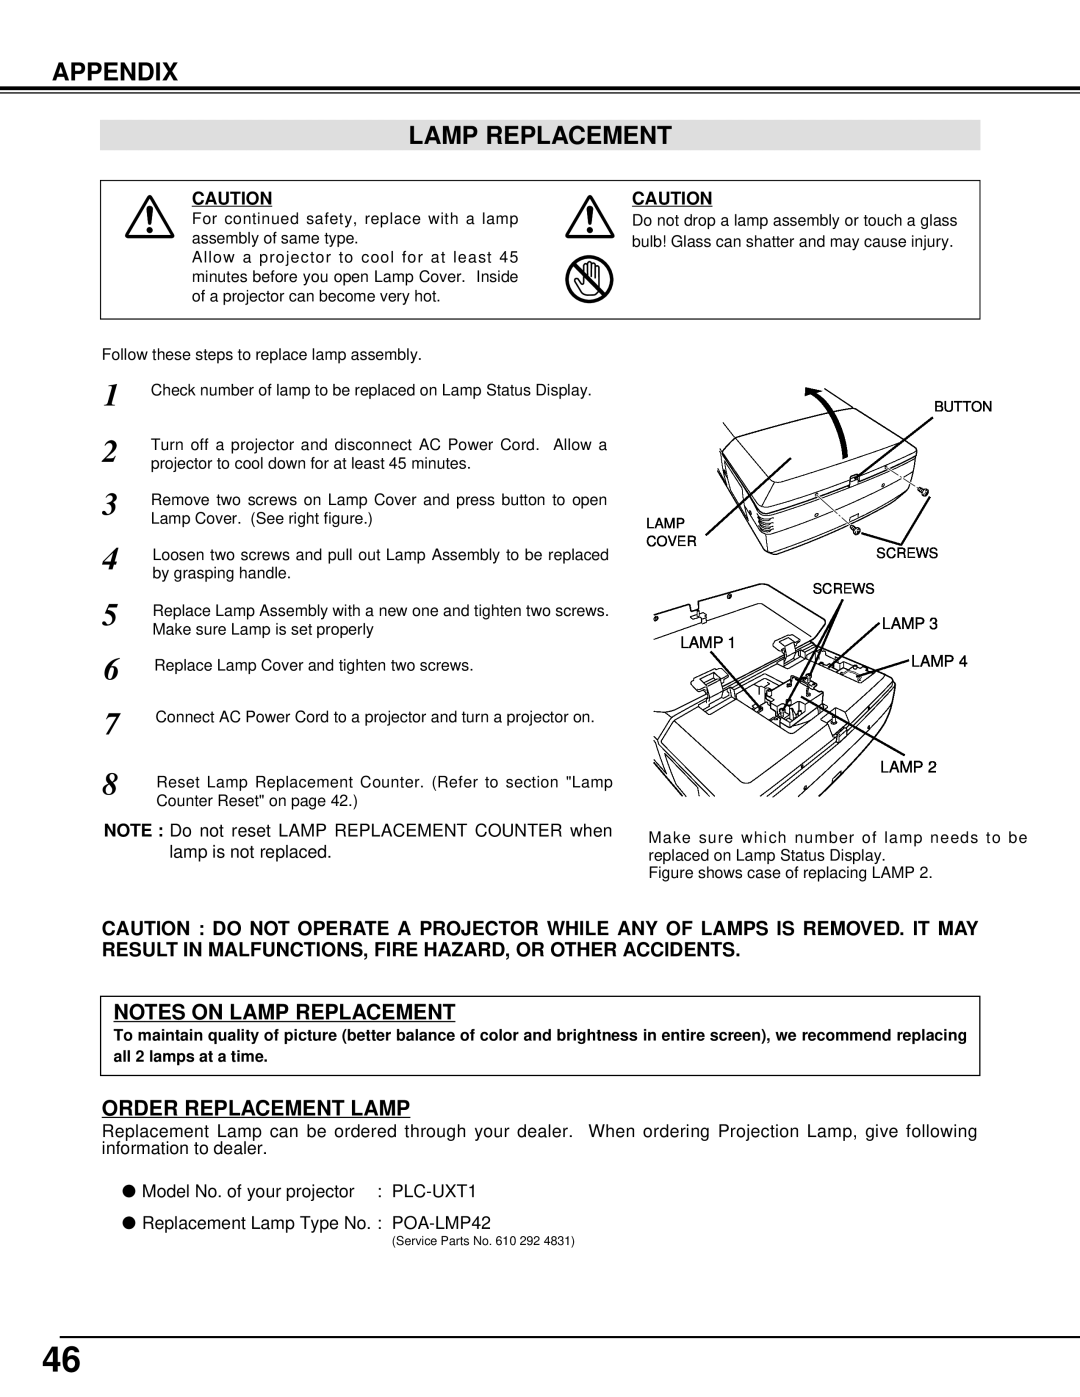 Eiki LC-UXT1 instruction manual Appendix Lamp Replacement, Notes On Lamp Replacement, Order Replacement Lamp 